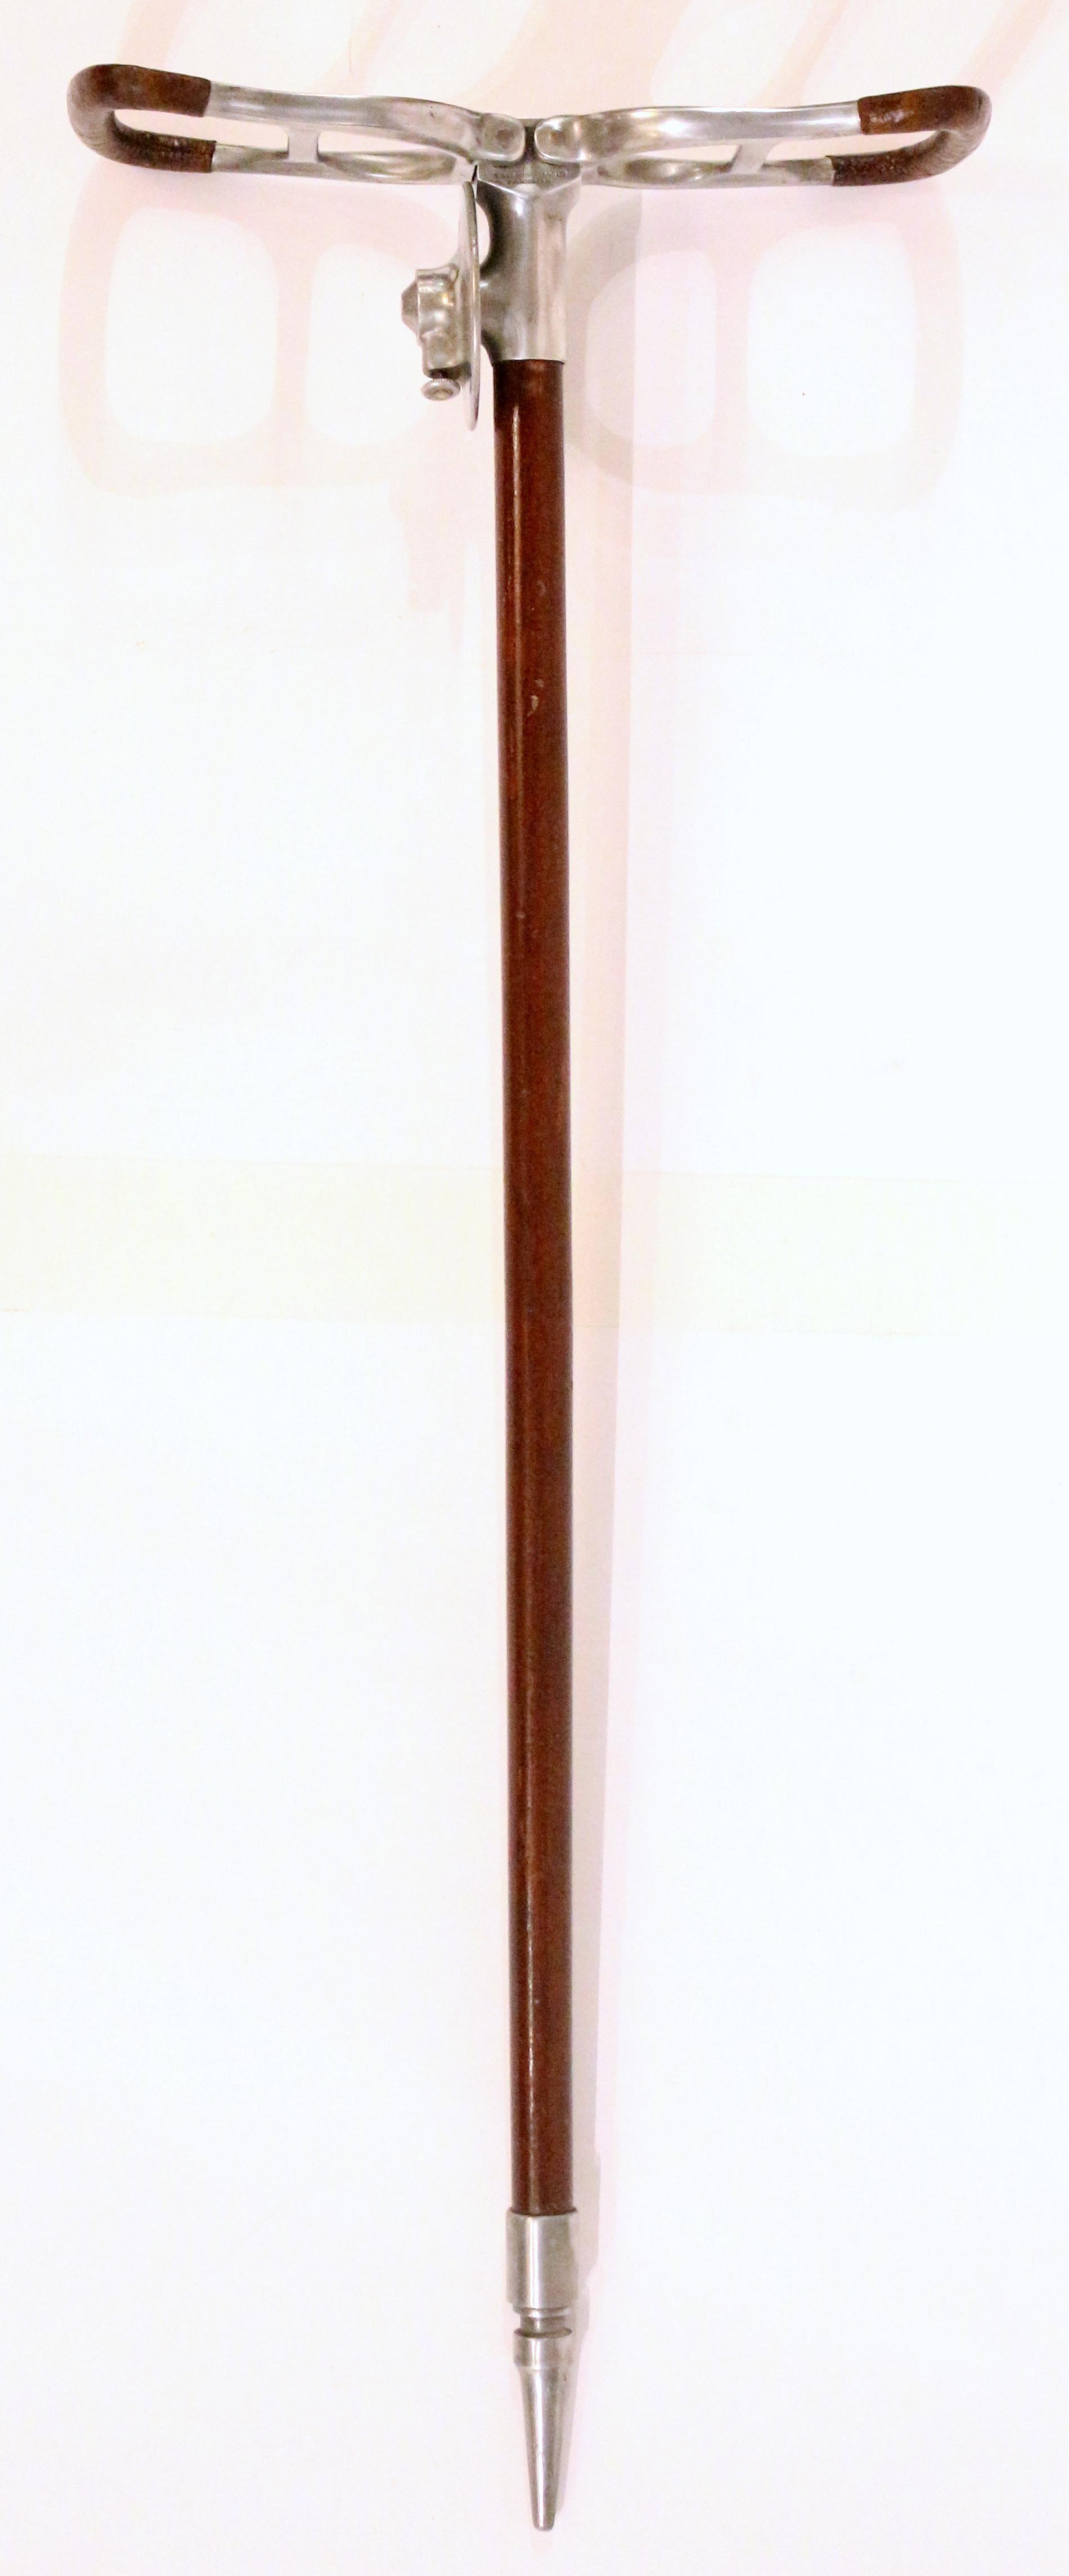 Patented field sporting event or hunting walking stick with folding seat by Mills Munitions Ltd., Birmingham, England. Early-mid 20th century. Steel with mahogany shaft; leather wrapped handles for seating.
4.5